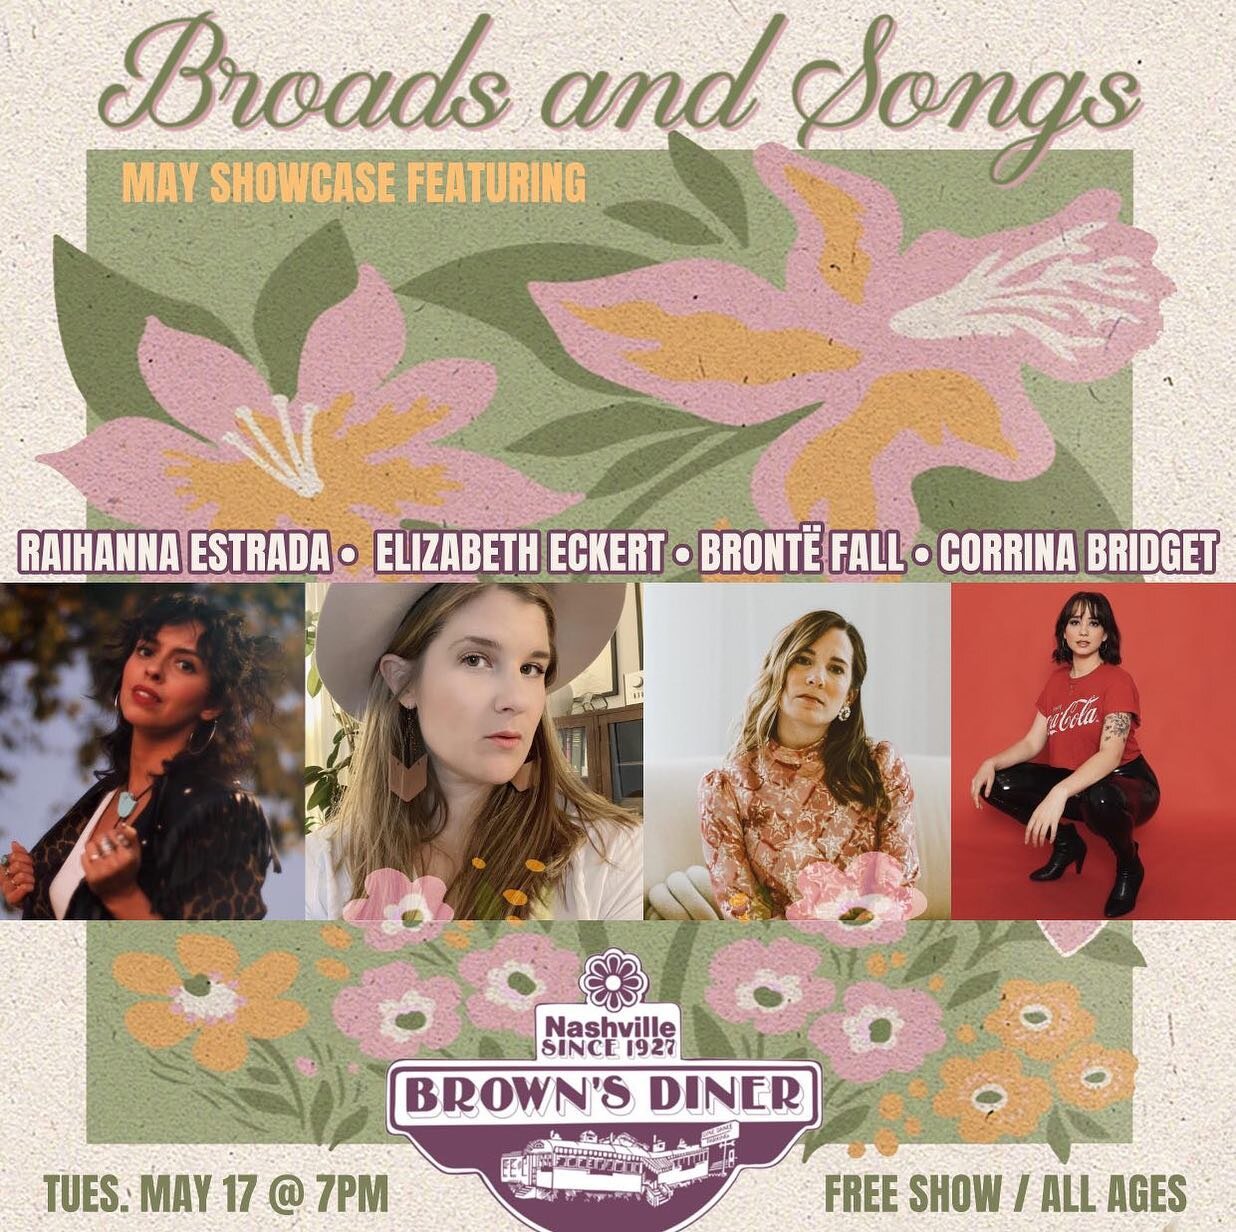 Howdy!👋🏽 🗓️ tmrw Tuesday May 16th at @thebrownsdiner in Nashville🍔 I&rsquo;m on at 7pm for @broadsandsongs monthly showcase hosted by @brontefall - free show🎶 

Lookin&rsquo; forward to singin&rsquo; songs, tellin&rsquo; stories 💘

#nashville #